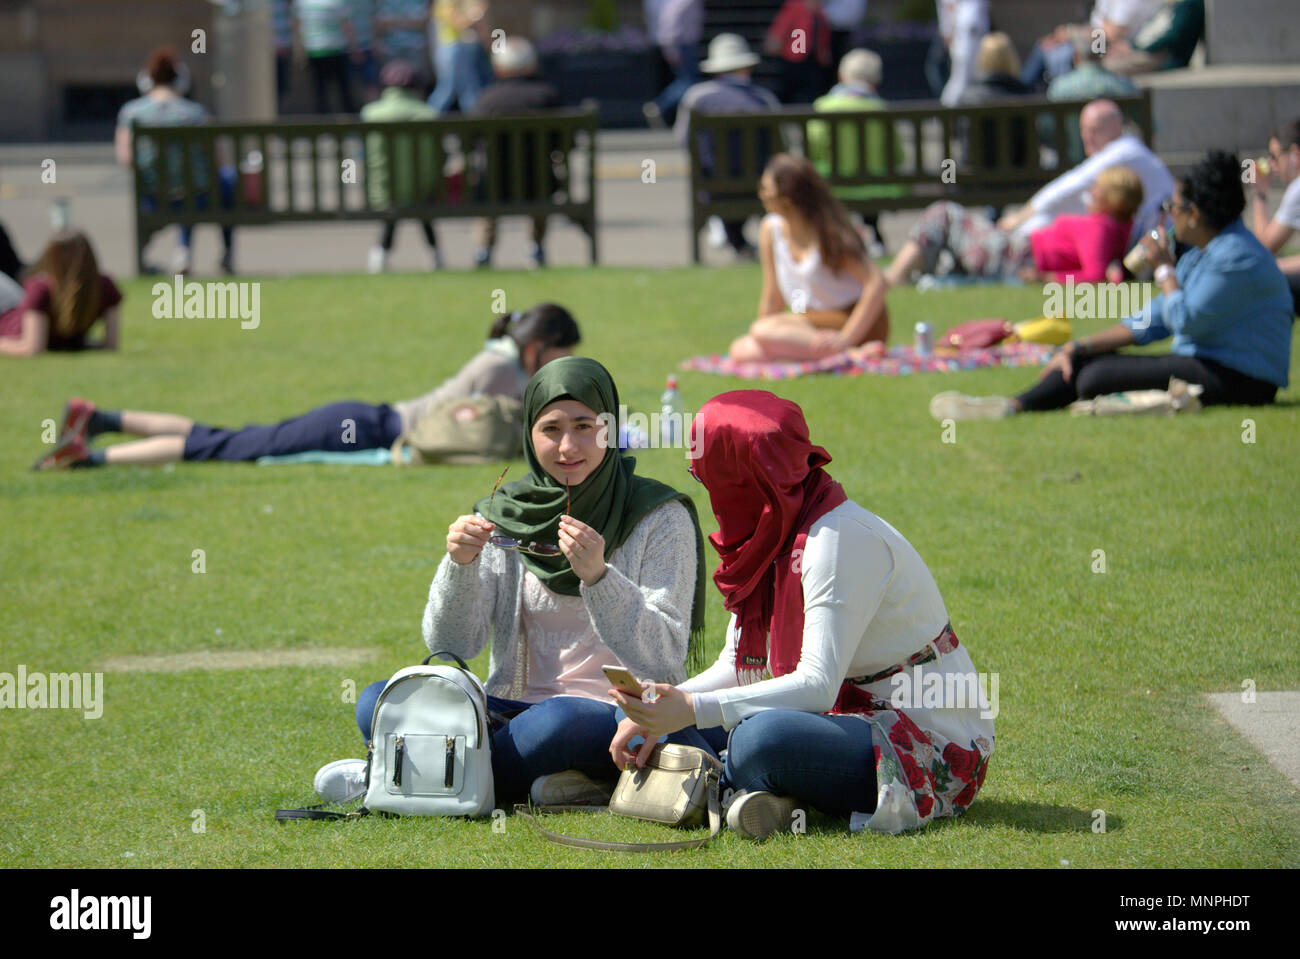 Glasgow, Scotland, UK 19th May.UK Weather: Sunny weather over the city brought the locals and tourists into the streets for taps aff weather.  As the royal wedding was ignored by early revelers who hit the sun in the central administrative hub of George Square. Gerard Ferry/Alamy news Stock Photo